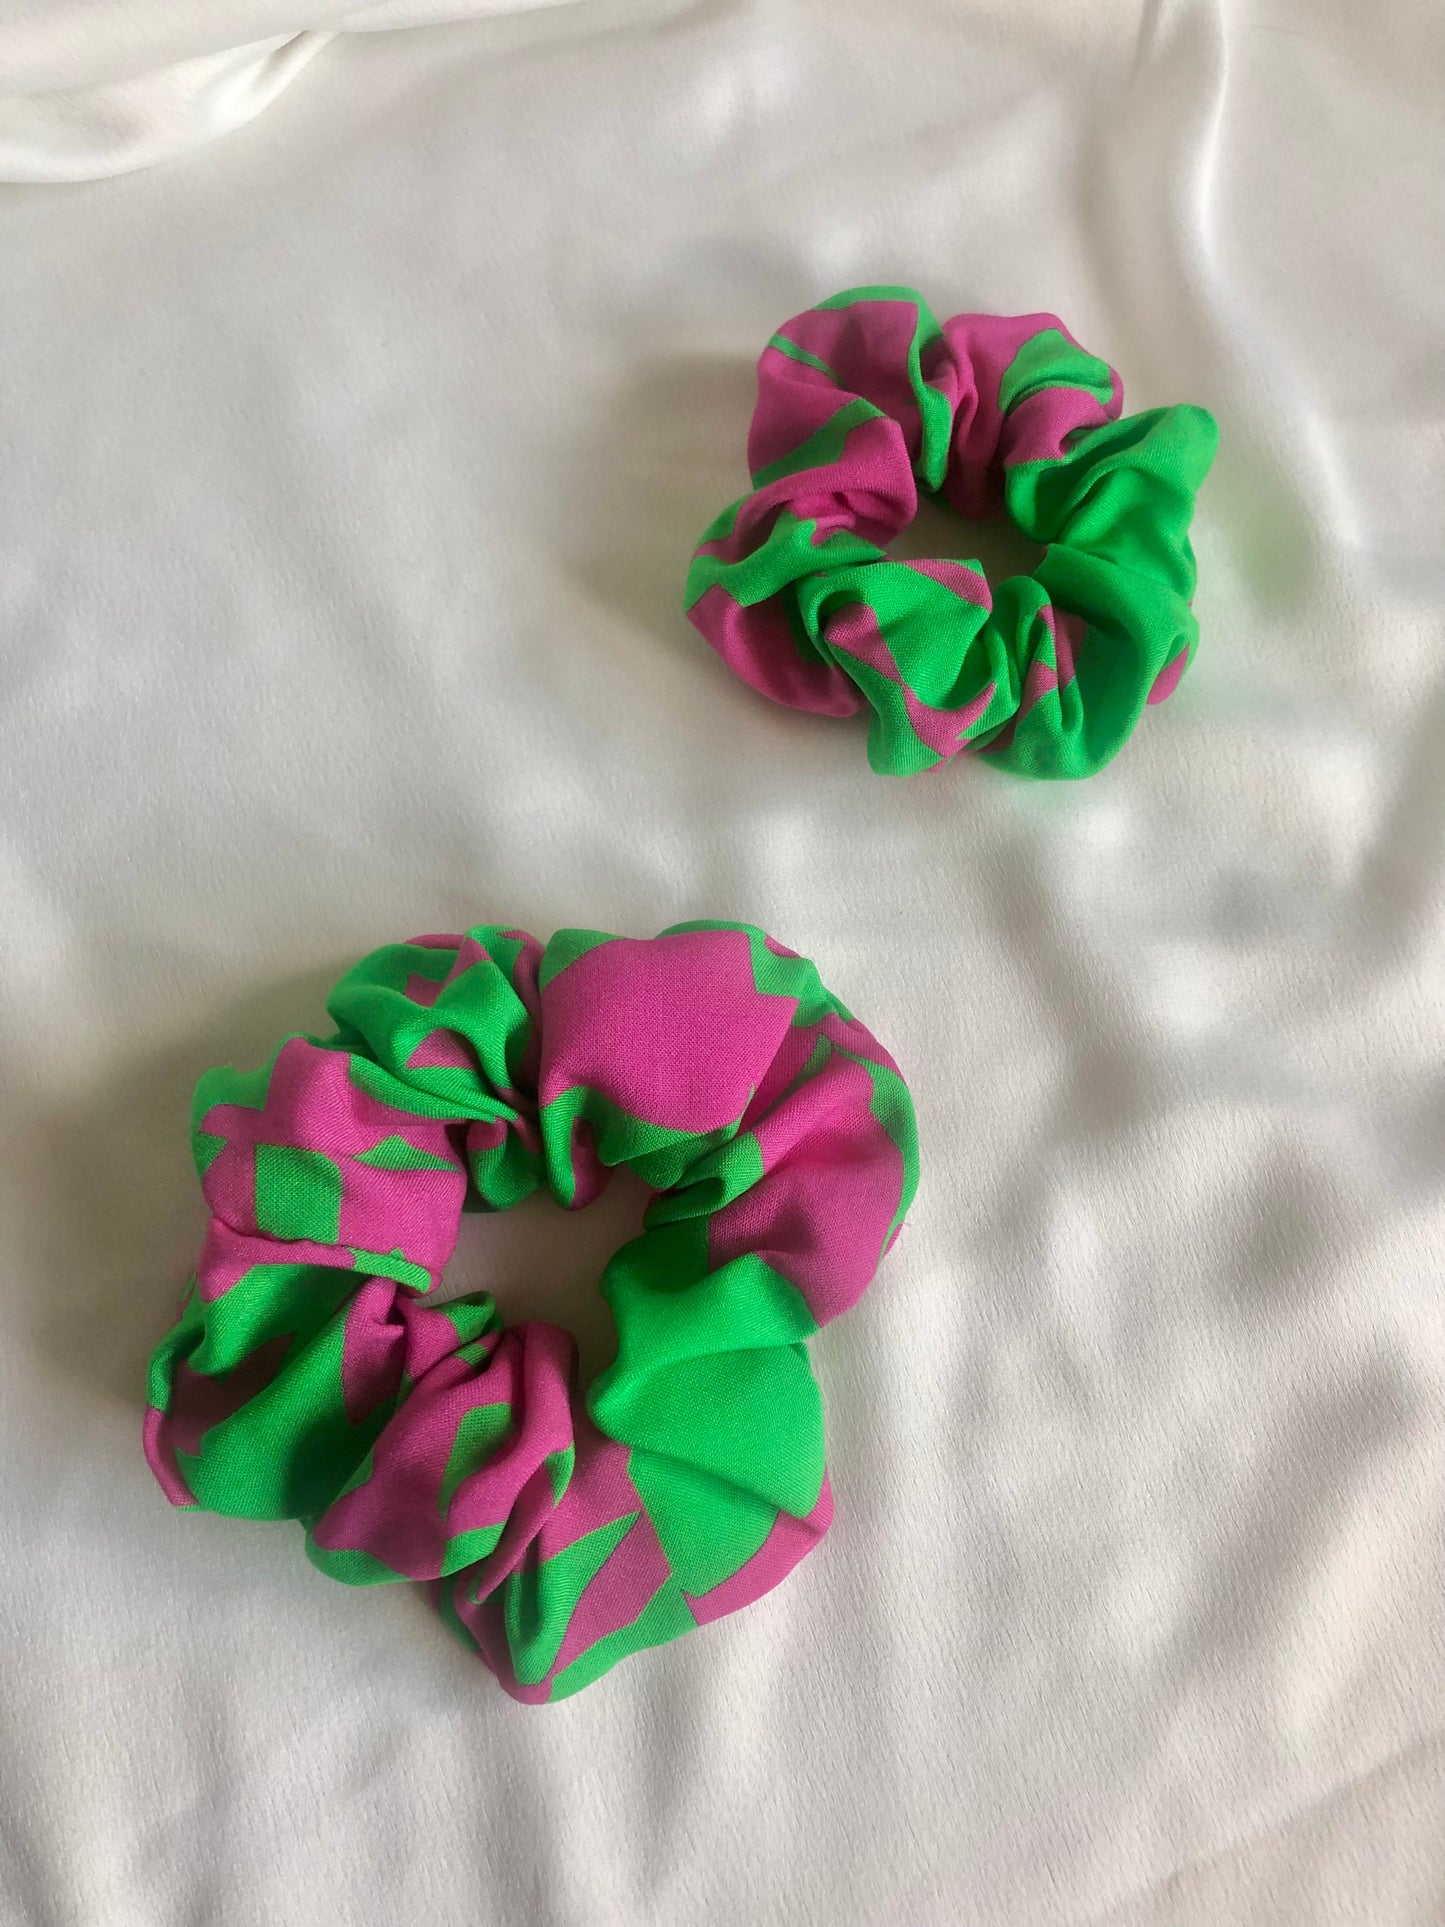 Tutti Frutti Green and Pink Abstract Print Scrunchie - choose size